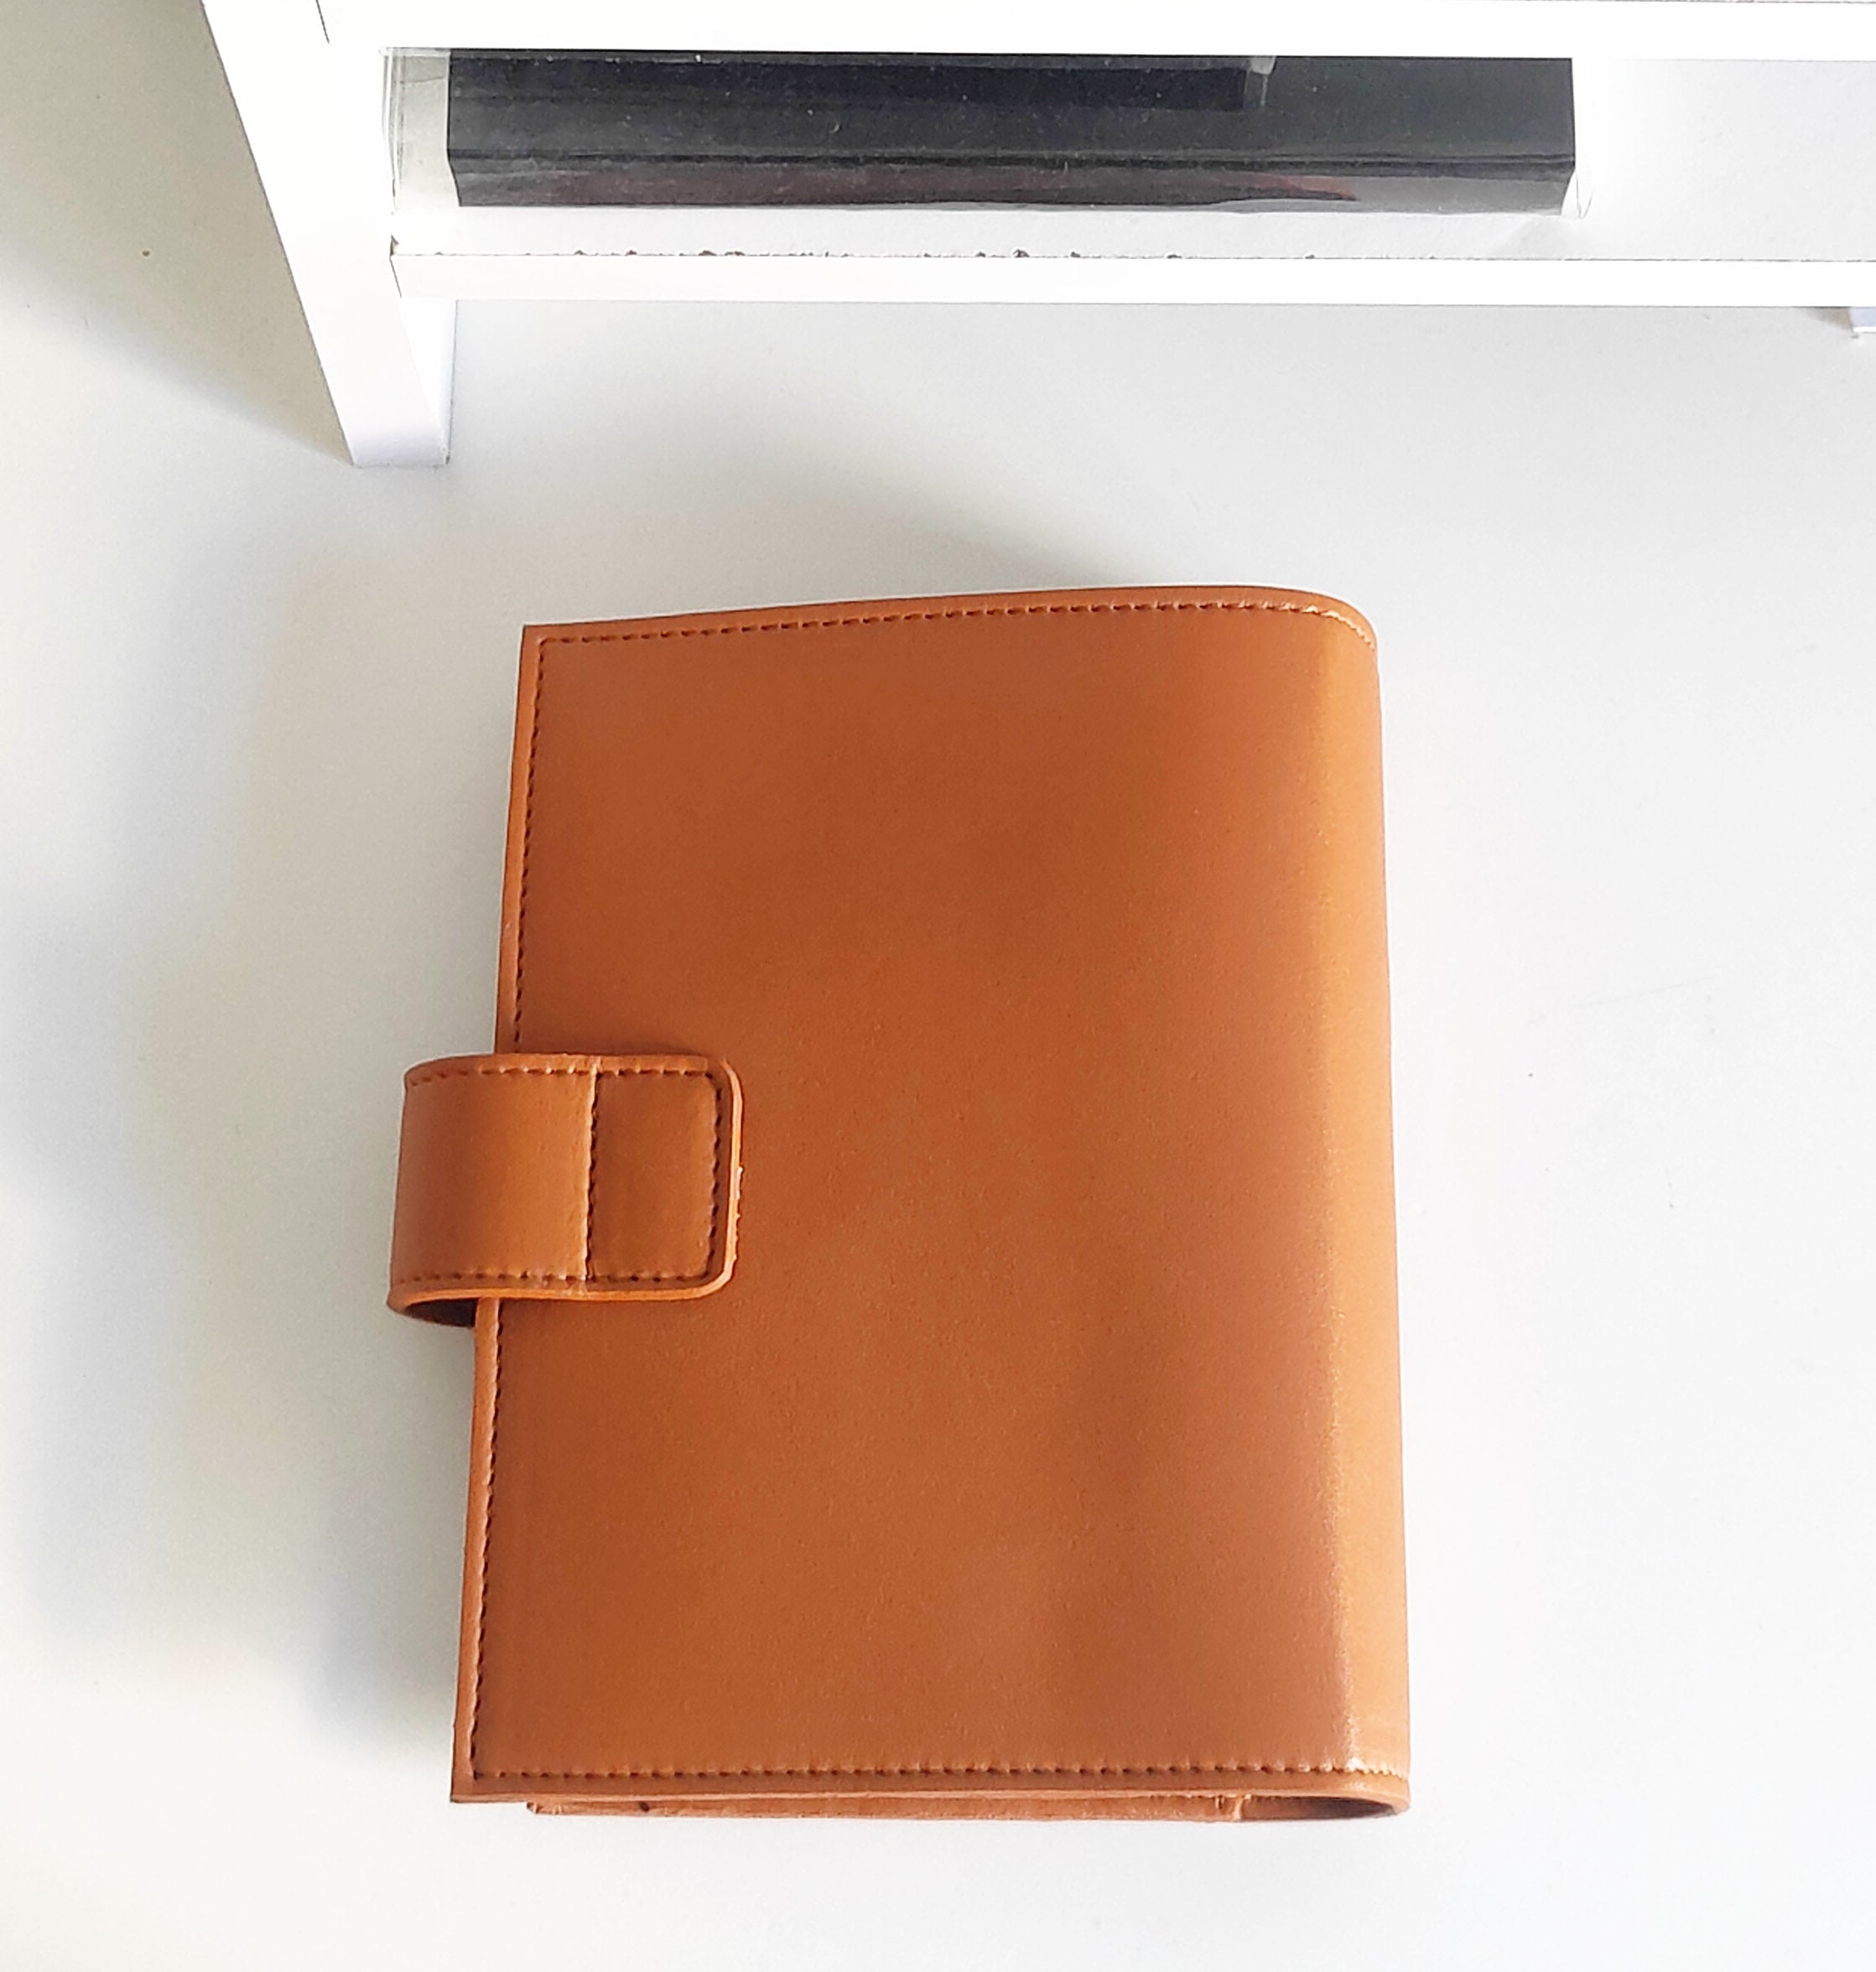 Personal Ring Binder - Cognac PU leather